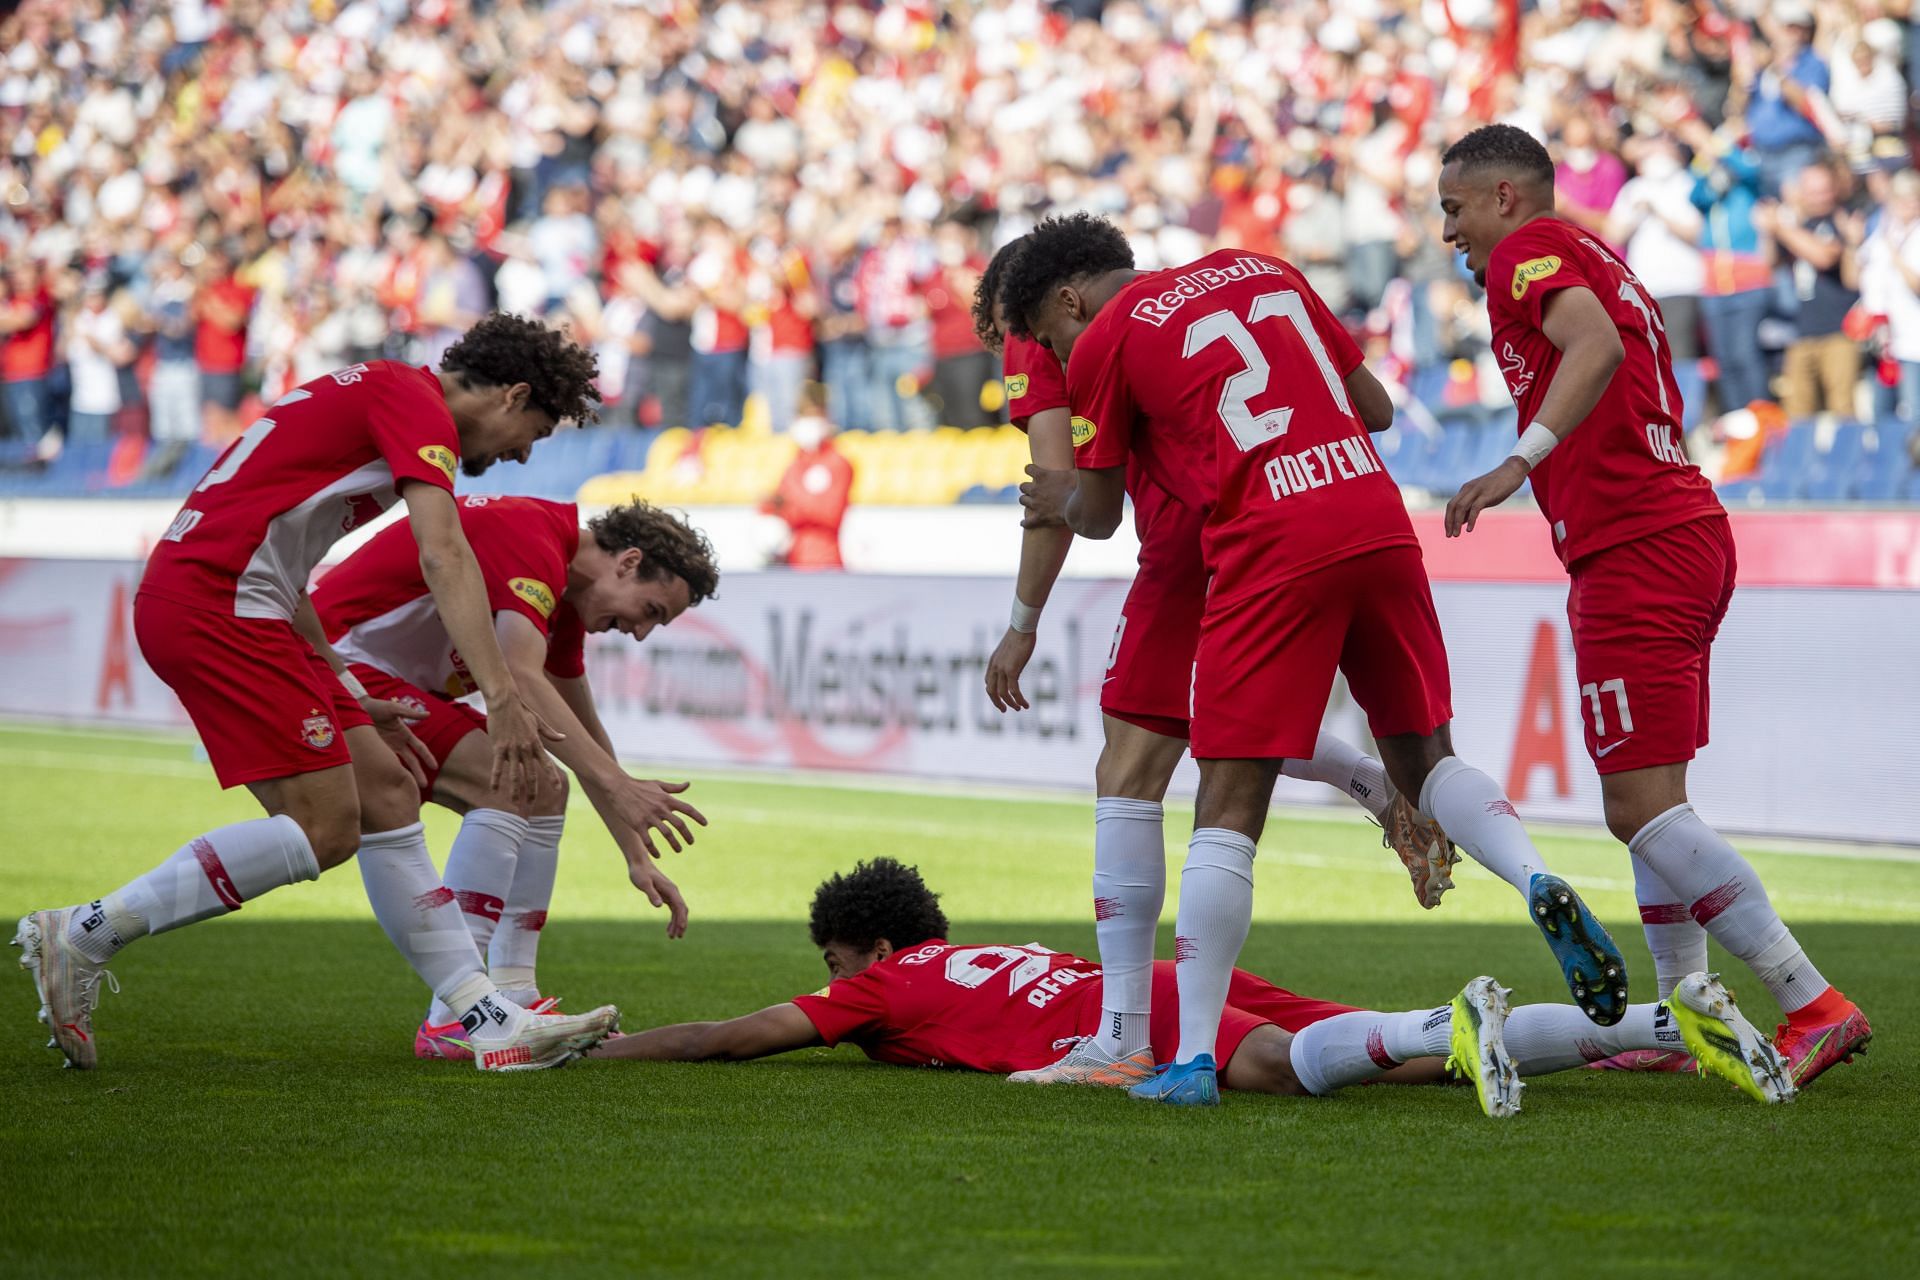 RB Salzburg will face Ried in the final of the Austrian Cup on Sunday